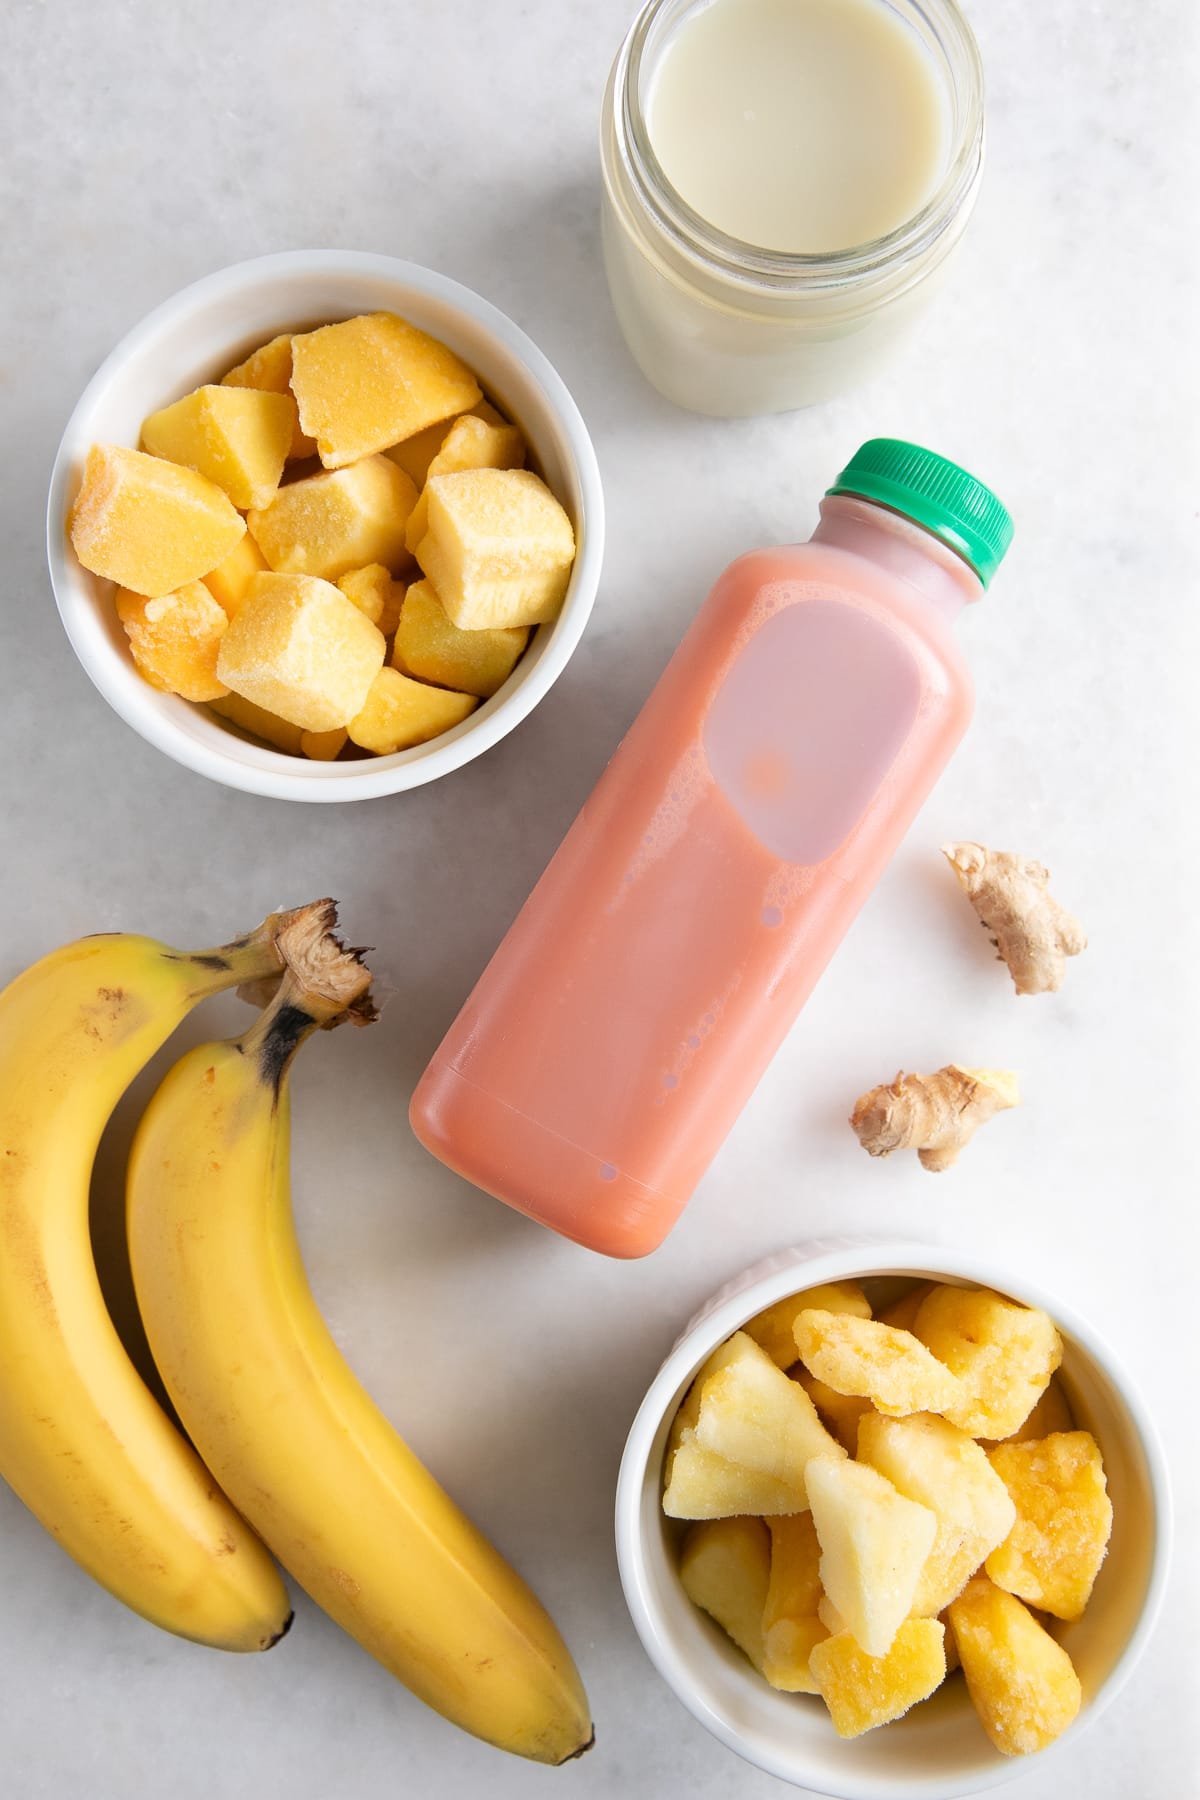 Ingredients needed to make a carrot smoothie including frozen mango, pineapple, banana, carrot juice, ginger, and oat milk.